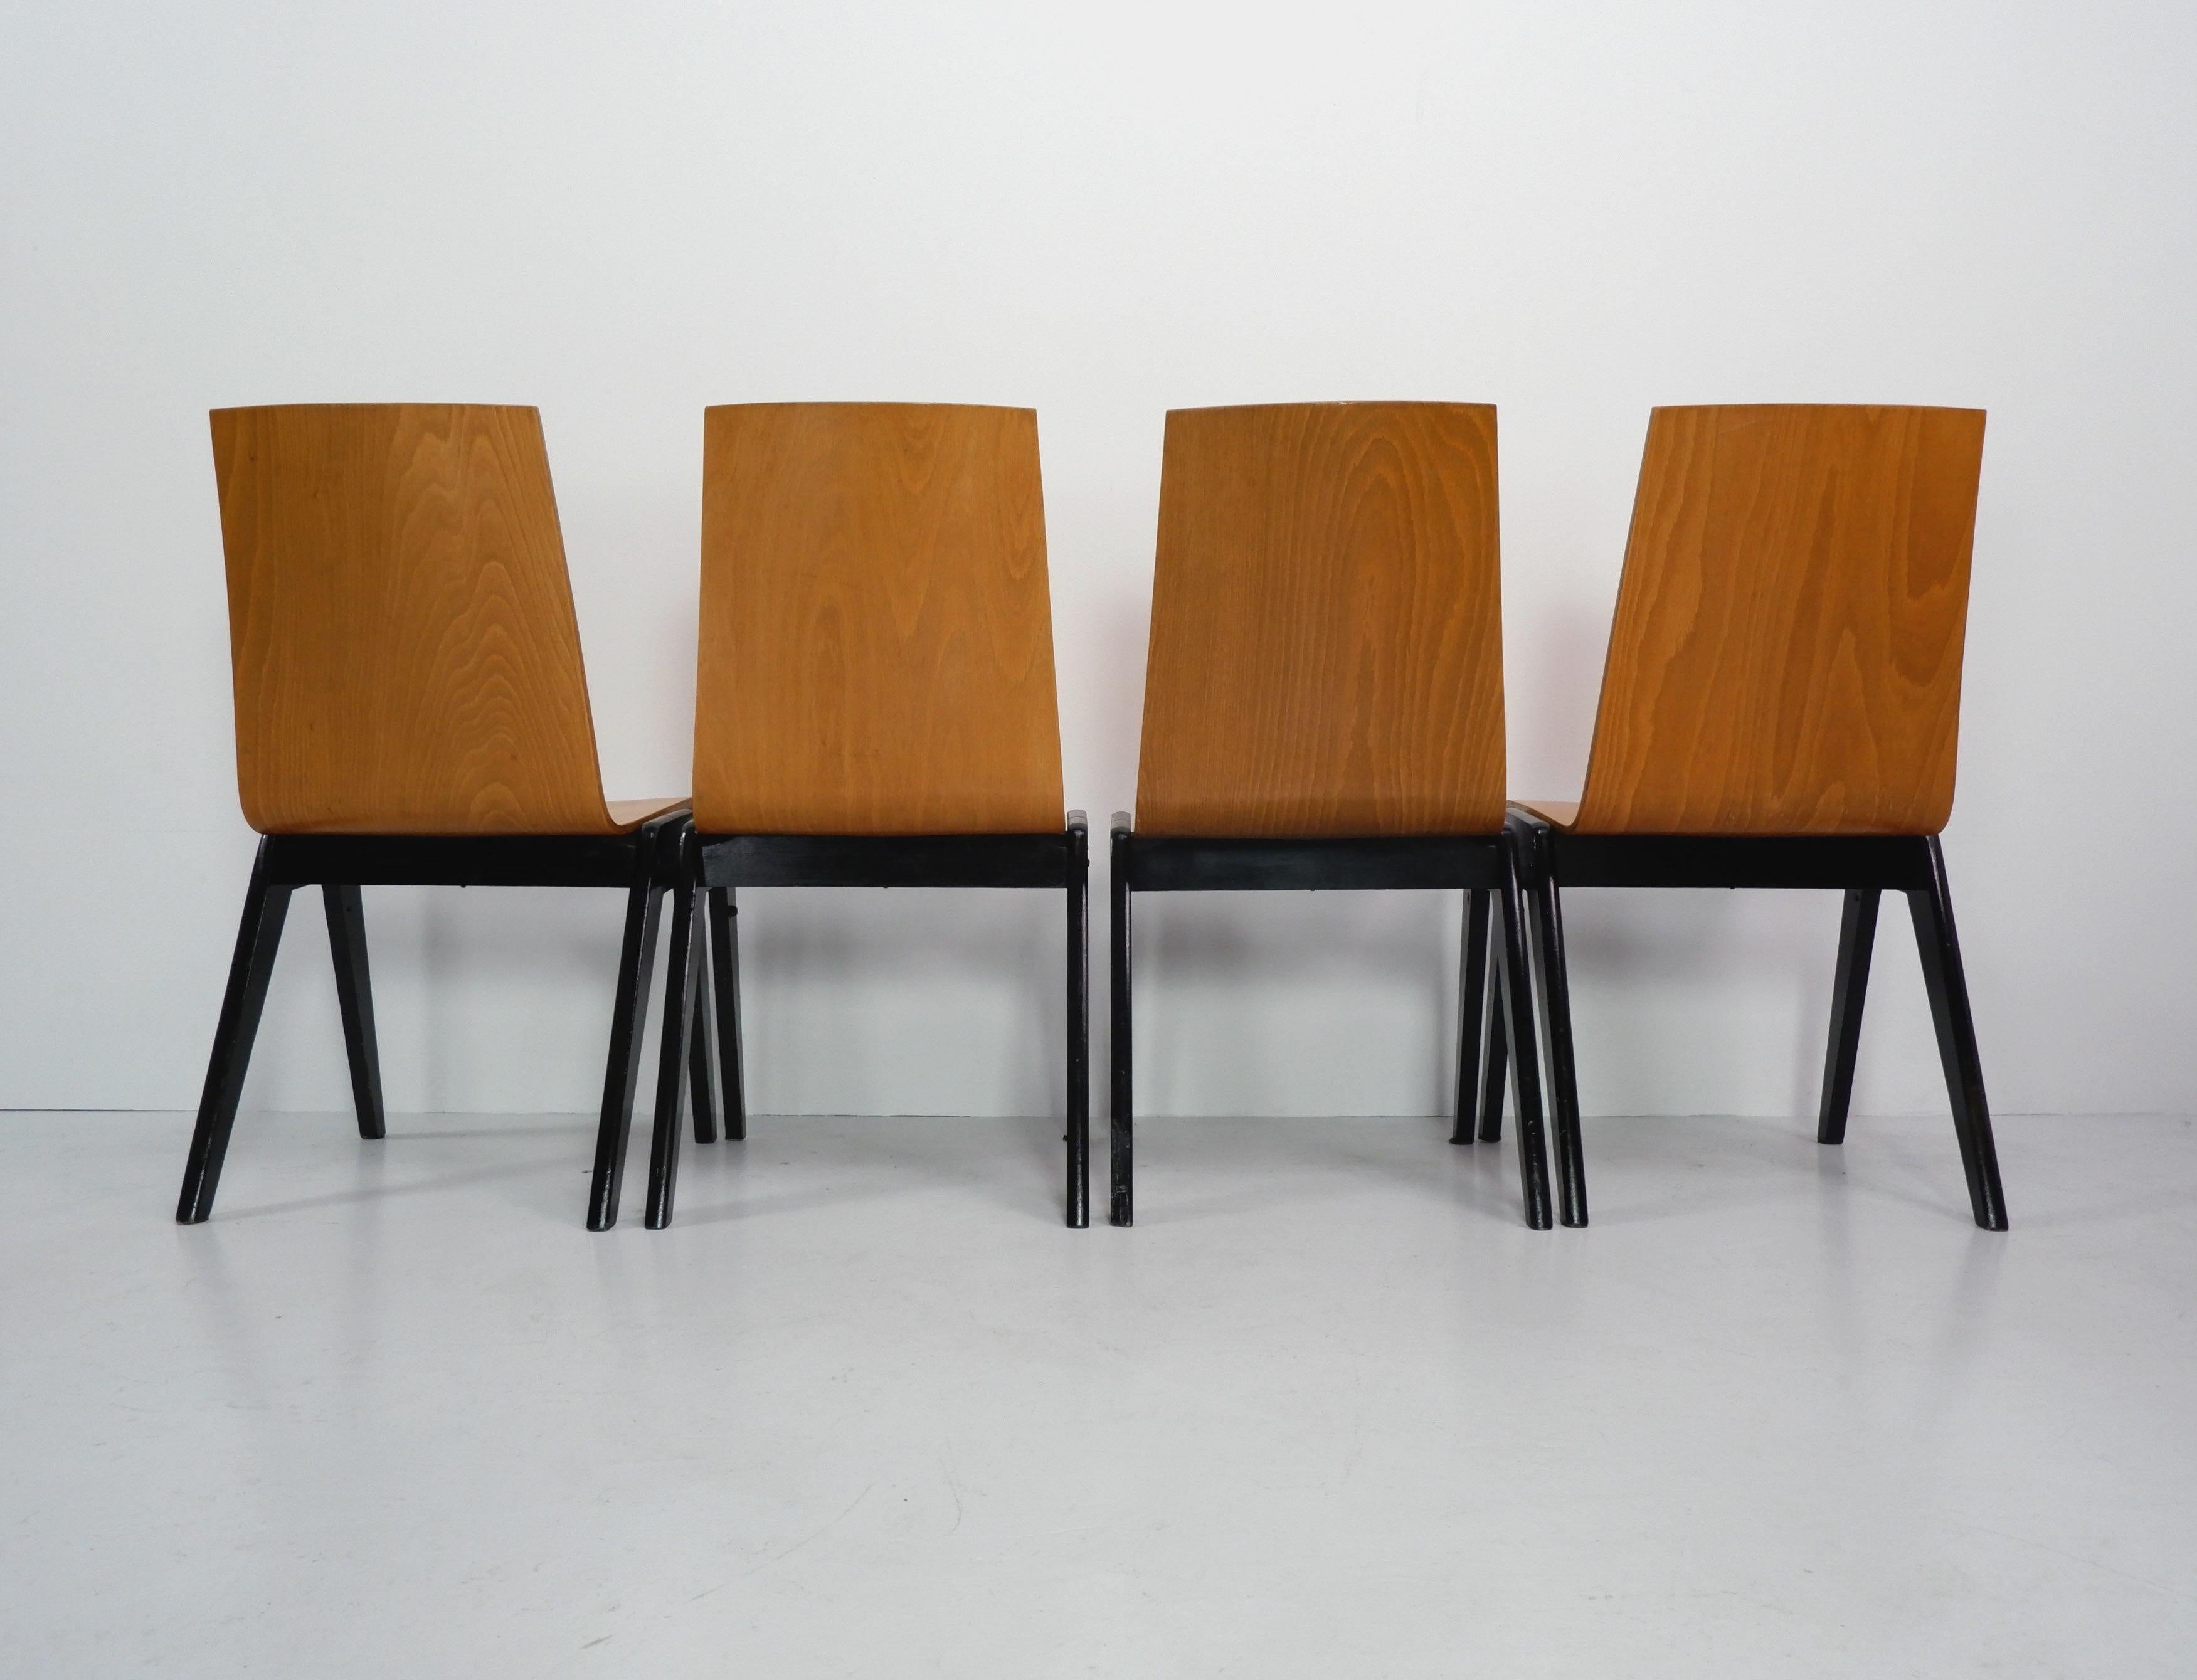 20th Century Plywood Stacking Chairs attrb. Roland Rainer, c.1950